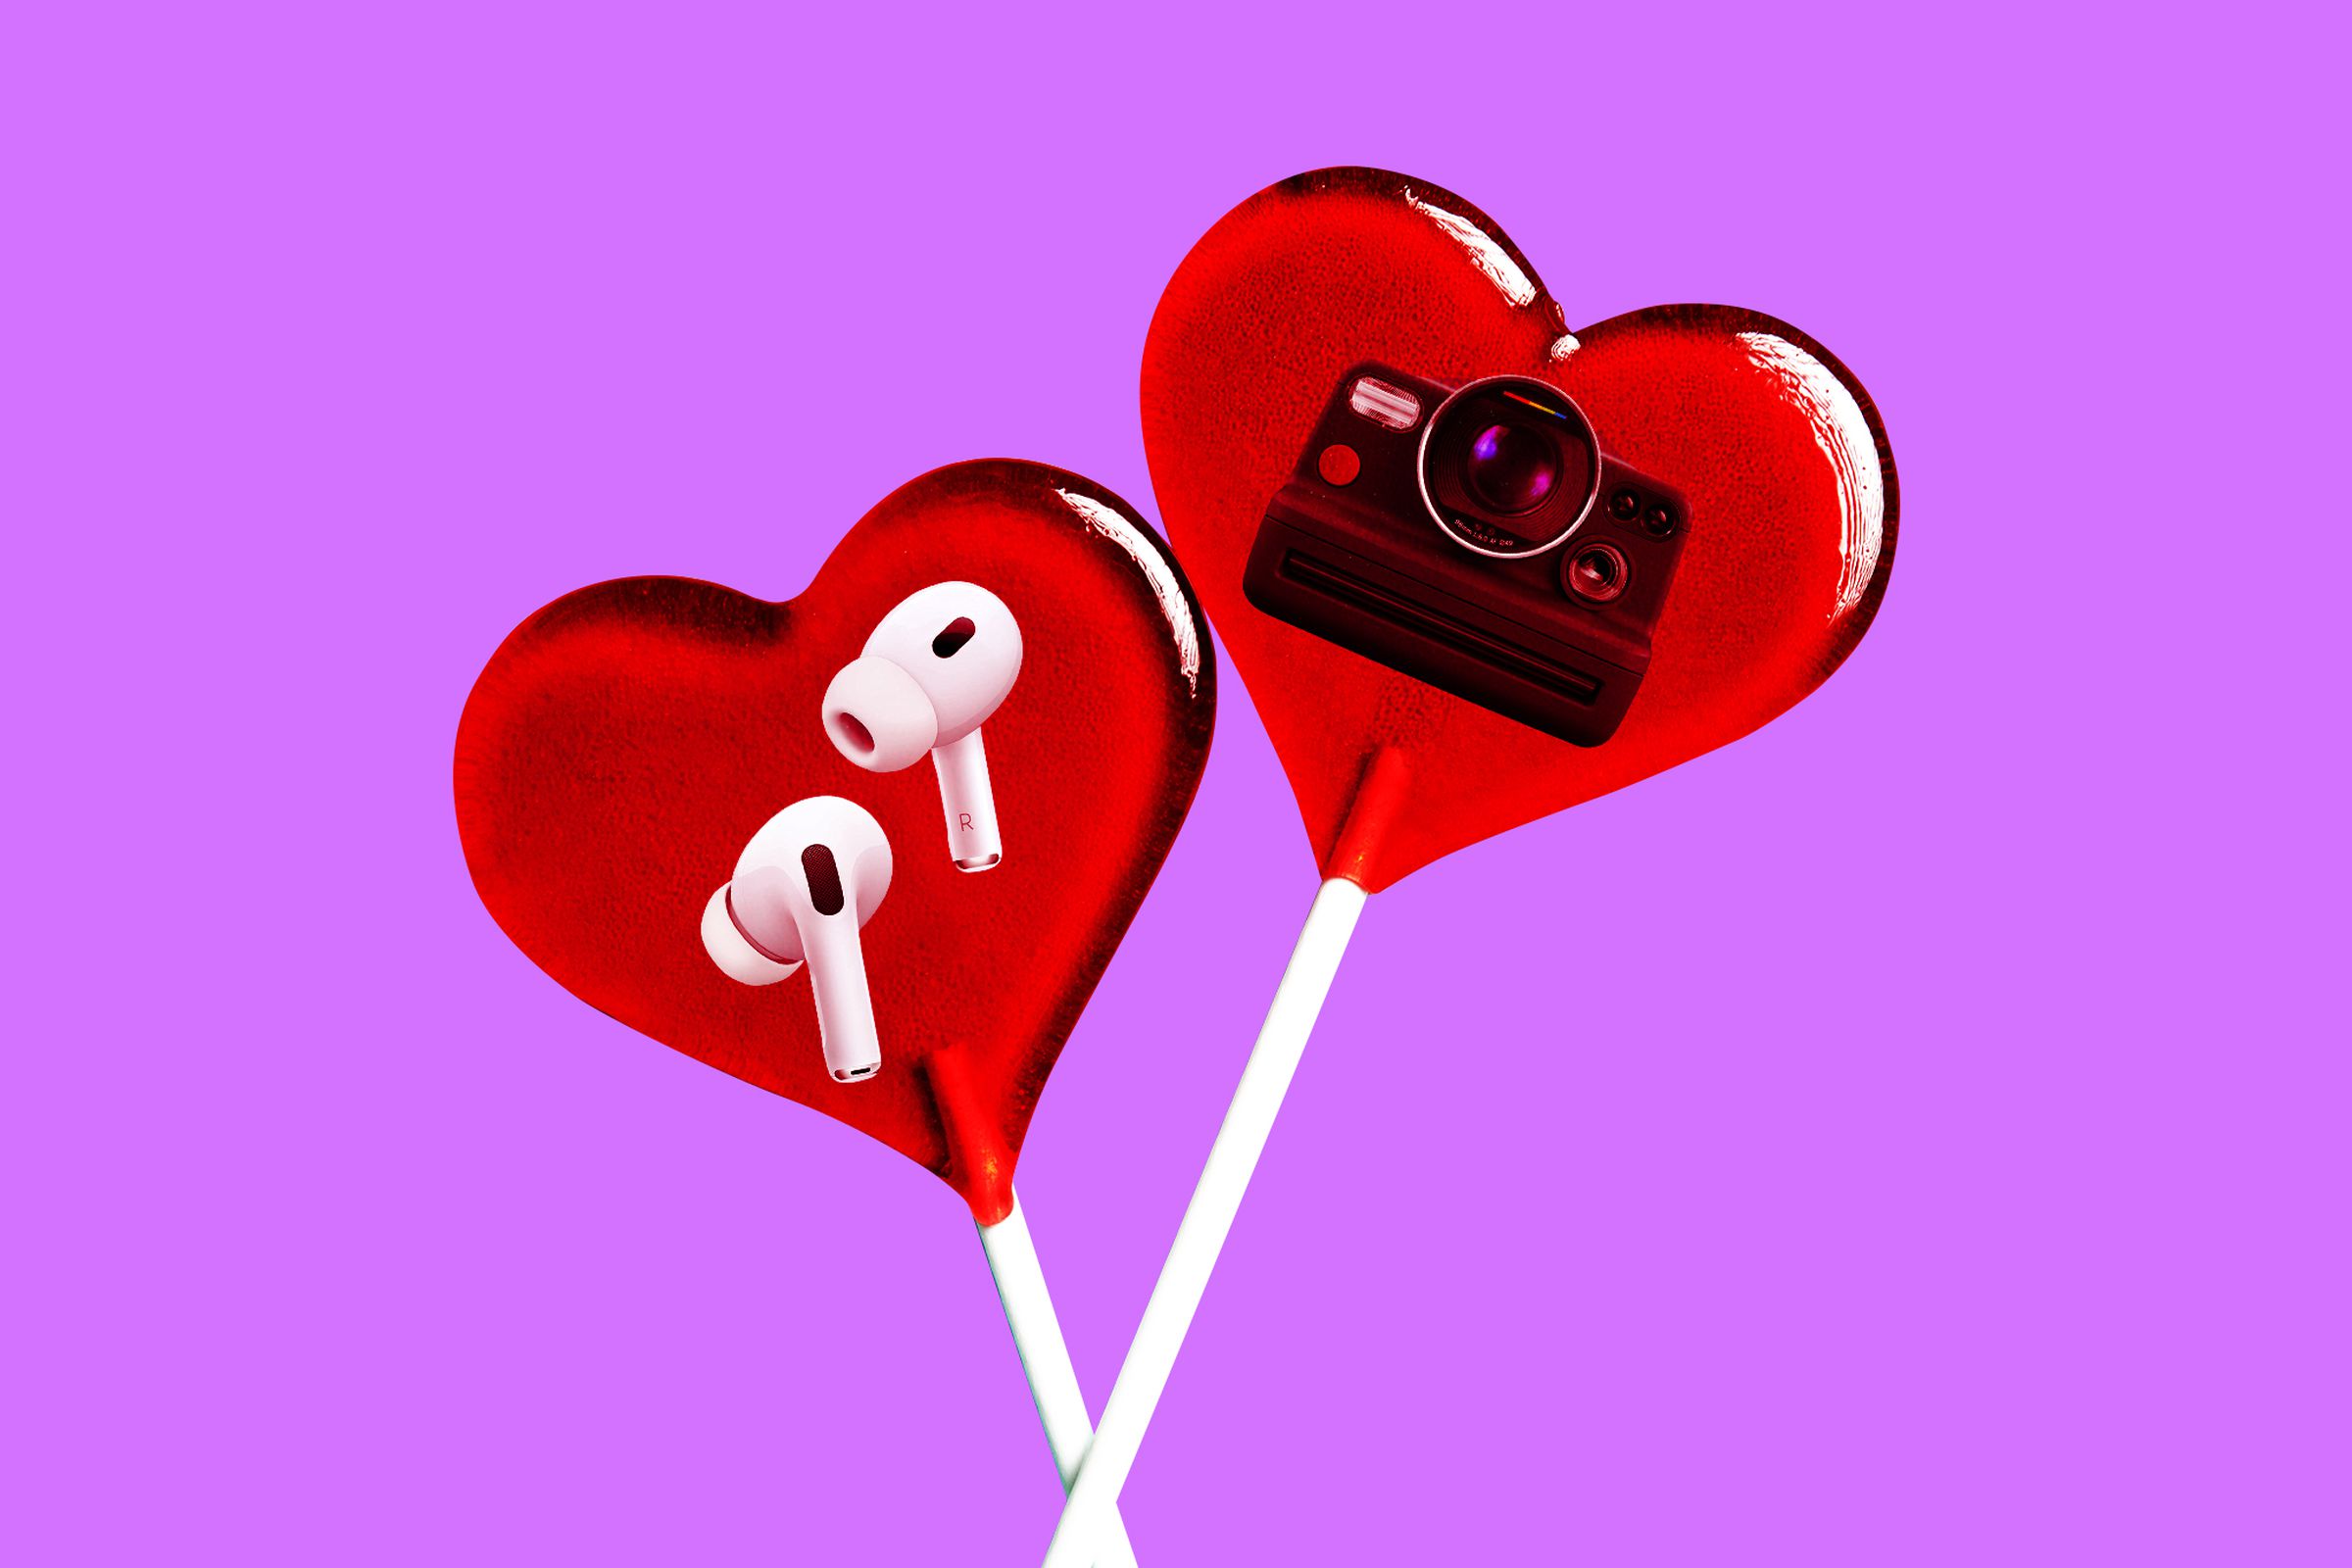 Photo collage of Apple AirPods and a Polaroid camera in two bright red heart-shaped lollipops.